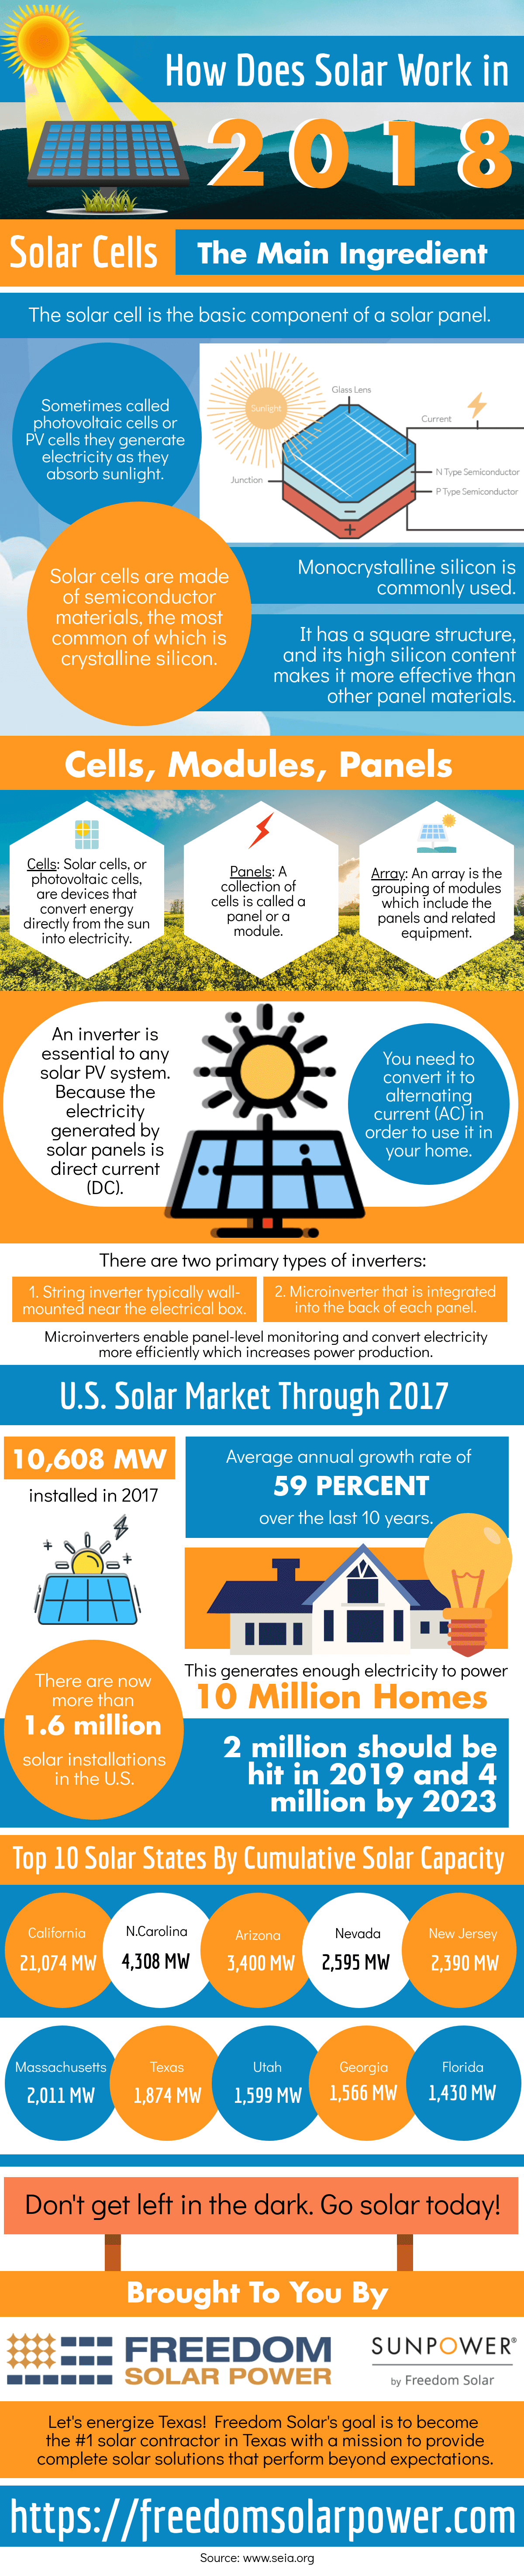 infographic-how-solar-works-2018-2